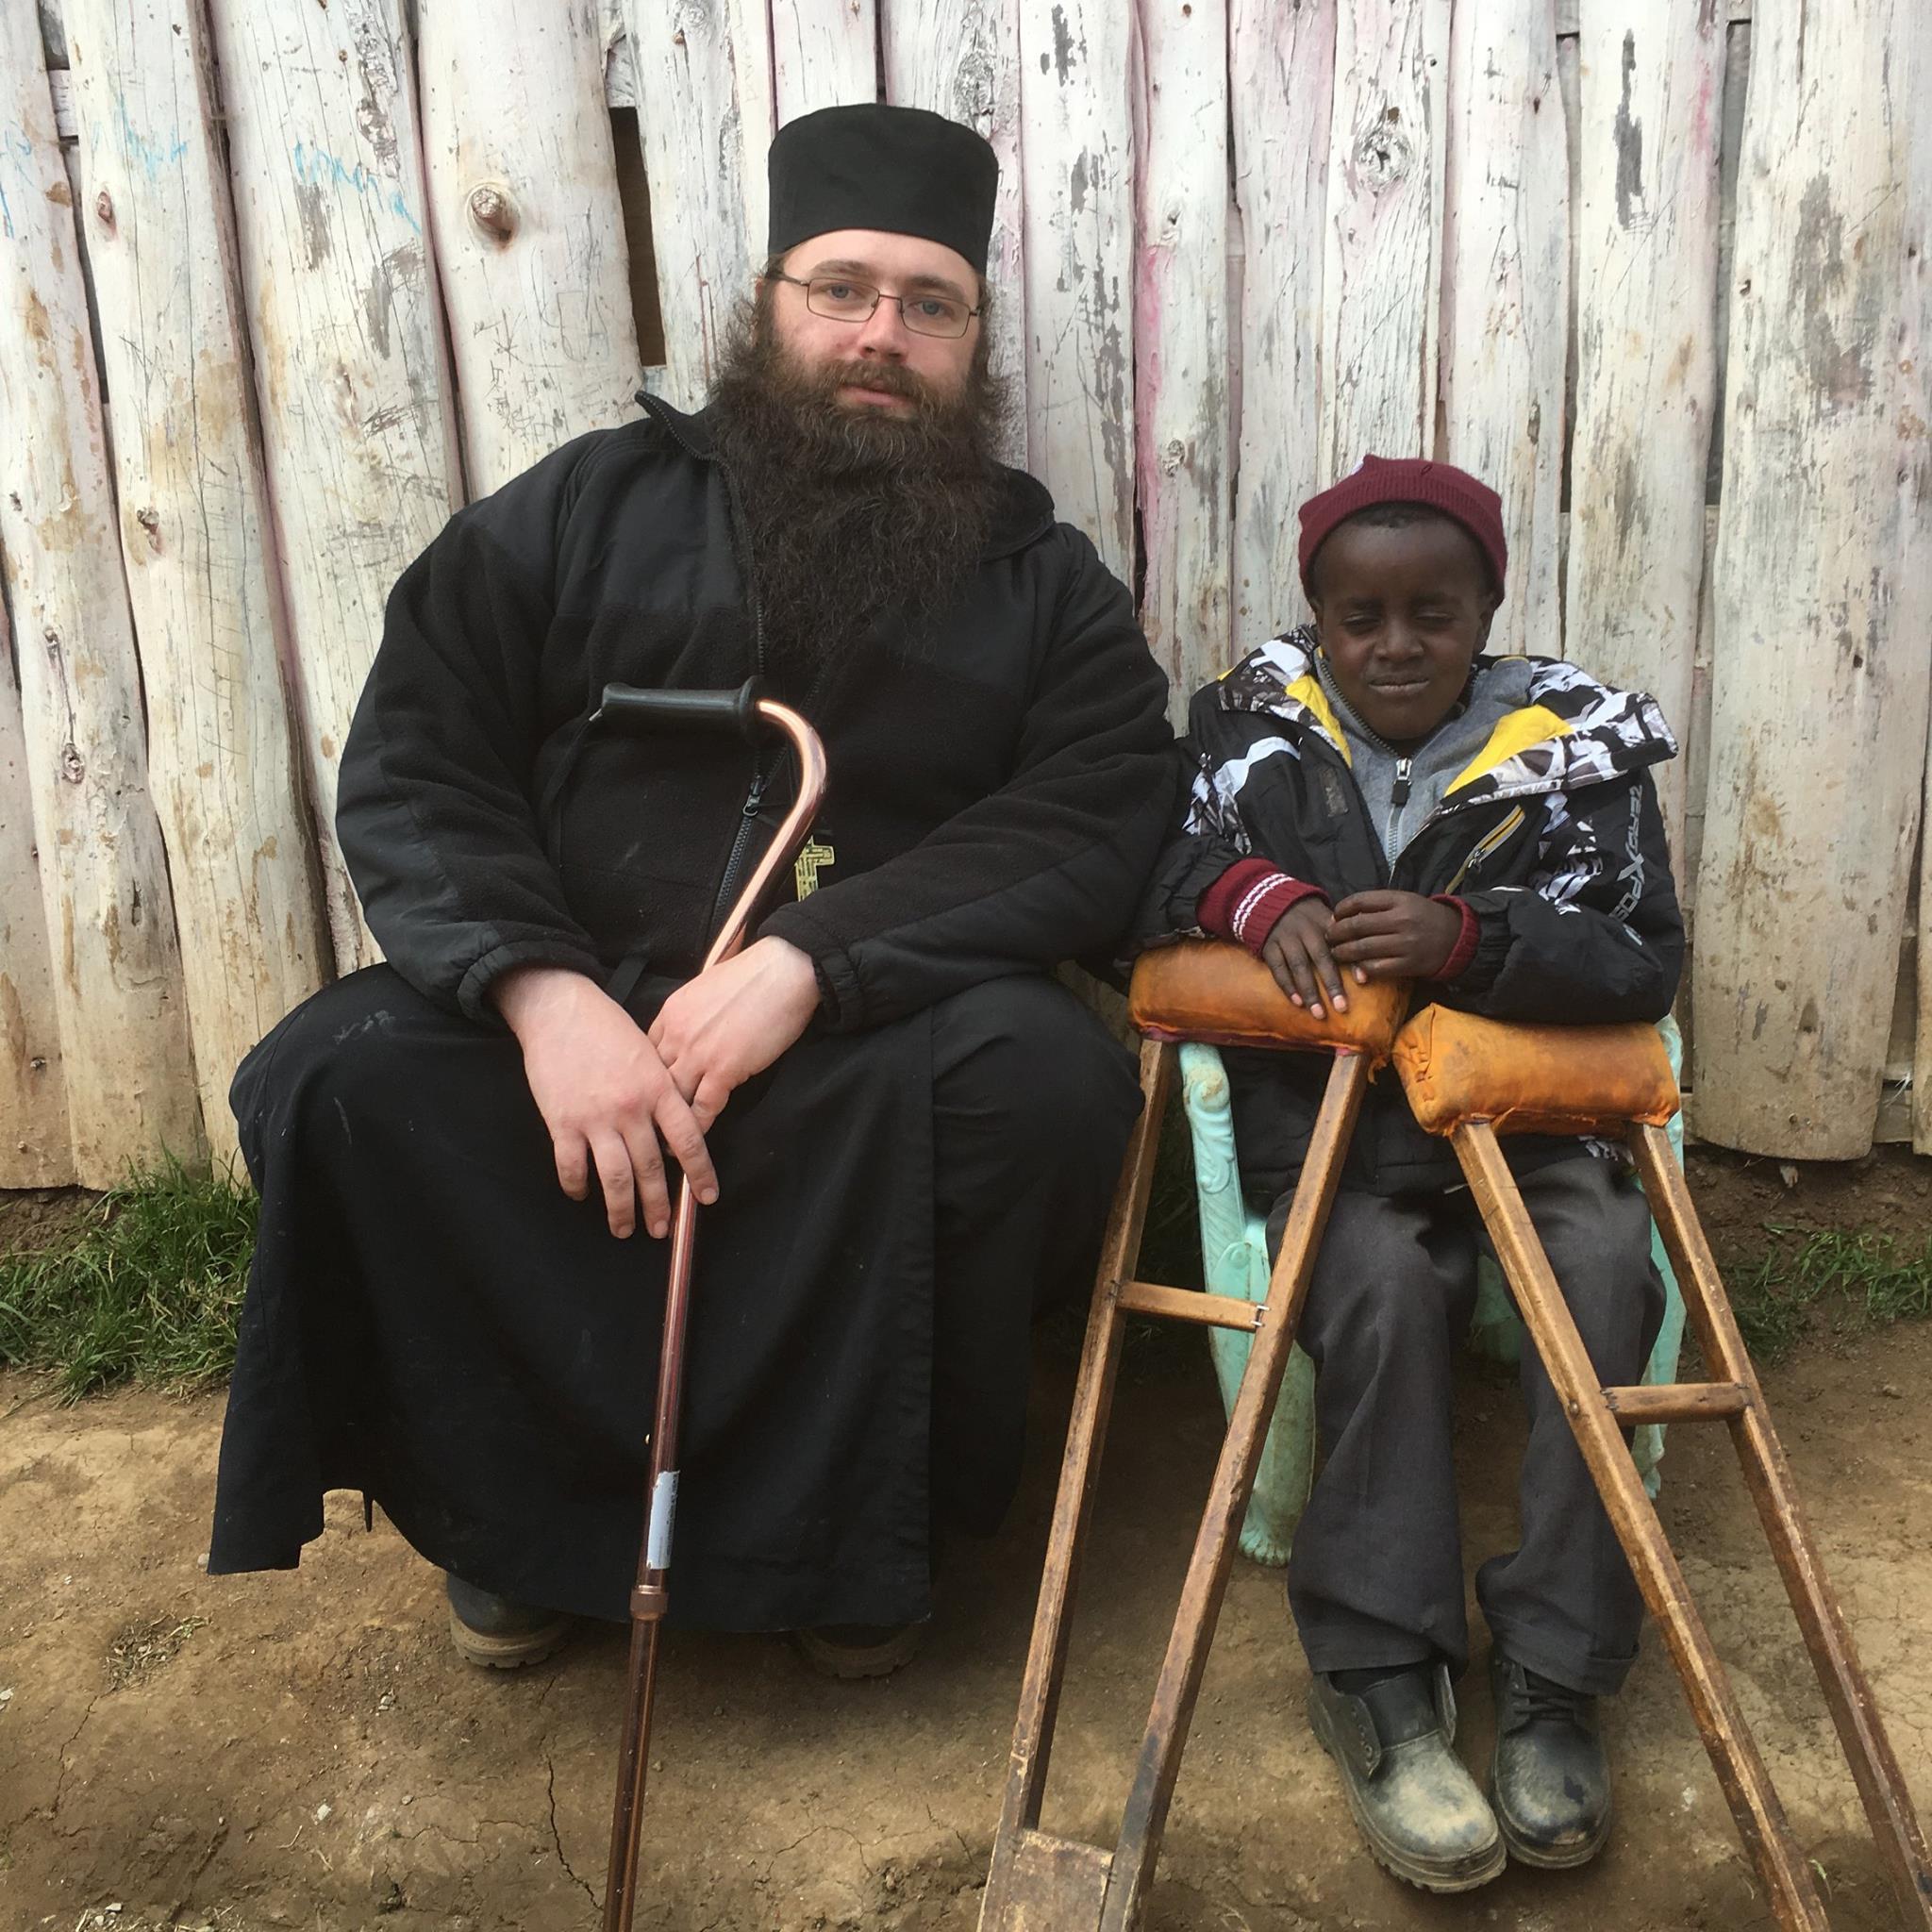 A disabled child who gets services at Orthodox mission Kenya